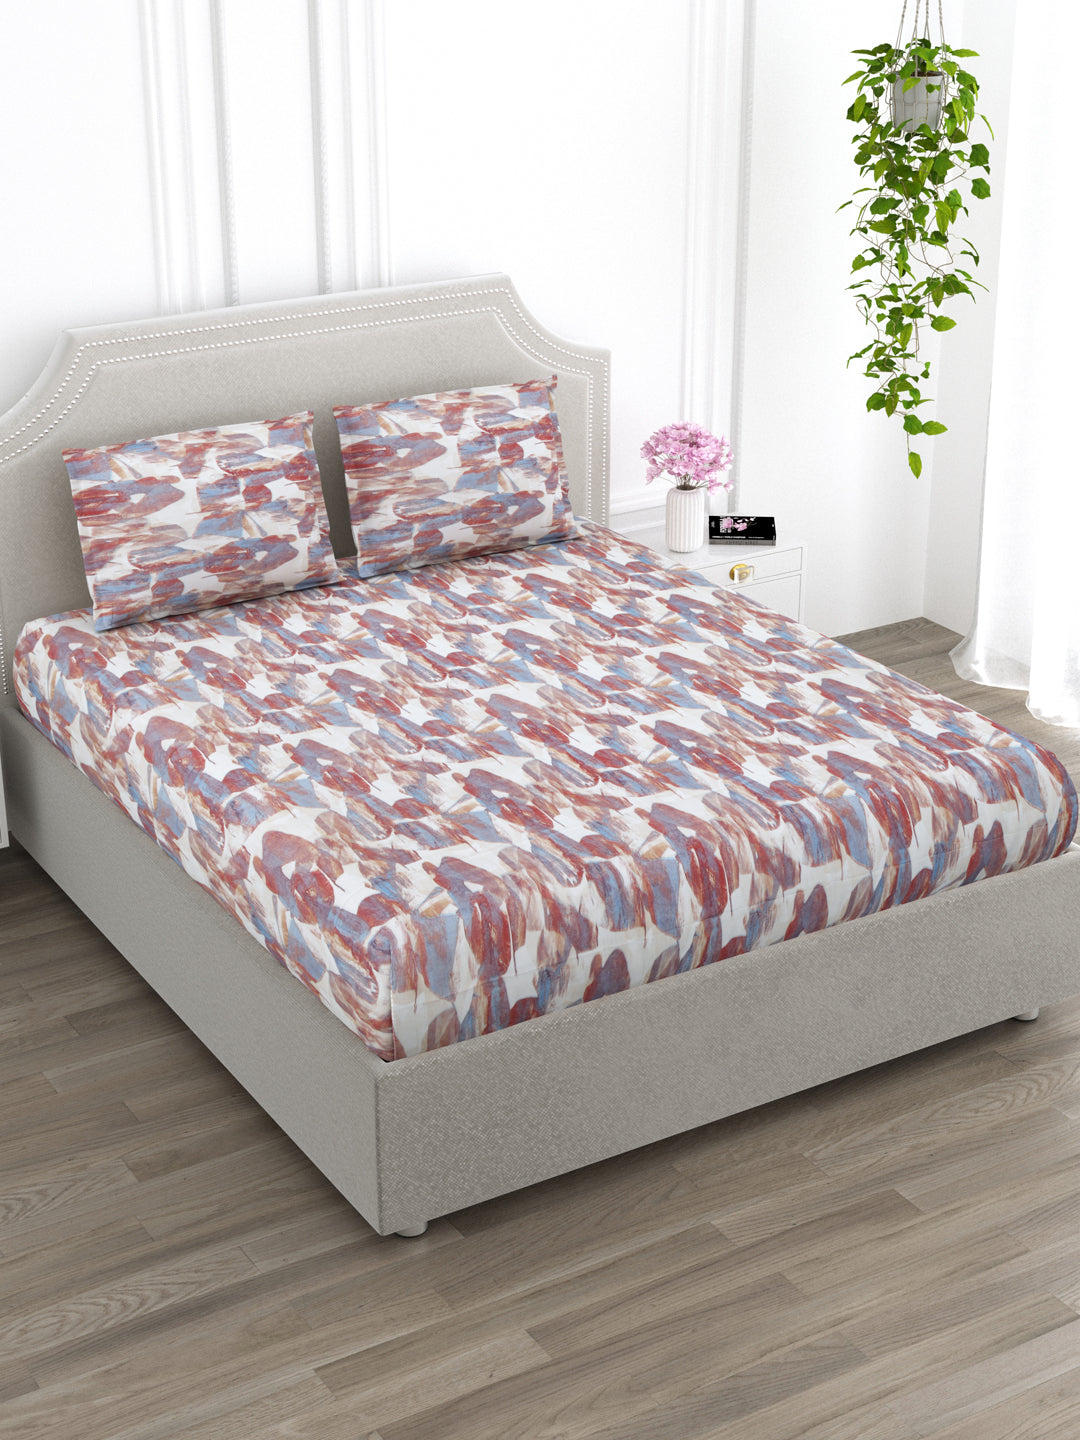 Multi Color Abstract Print King Size Bed Cotton Linen